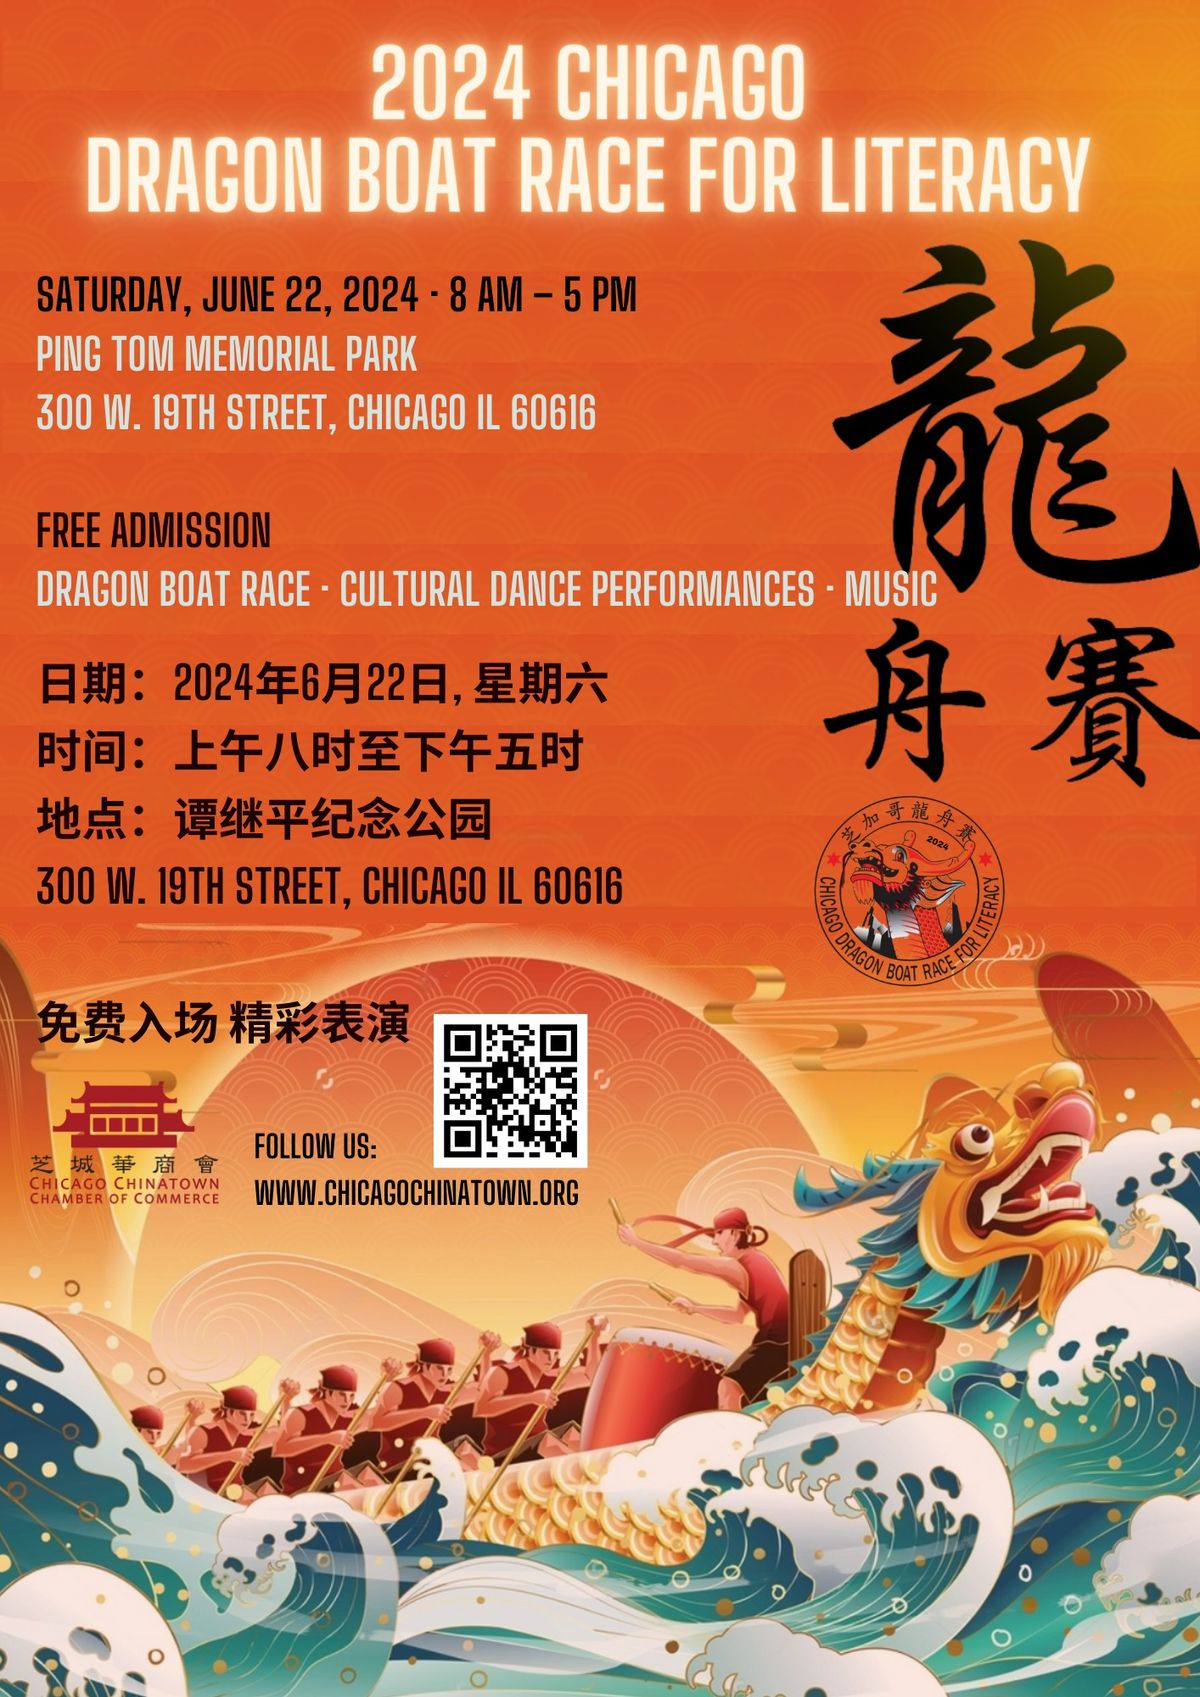 2024 Dragon Boat Race For Literacy